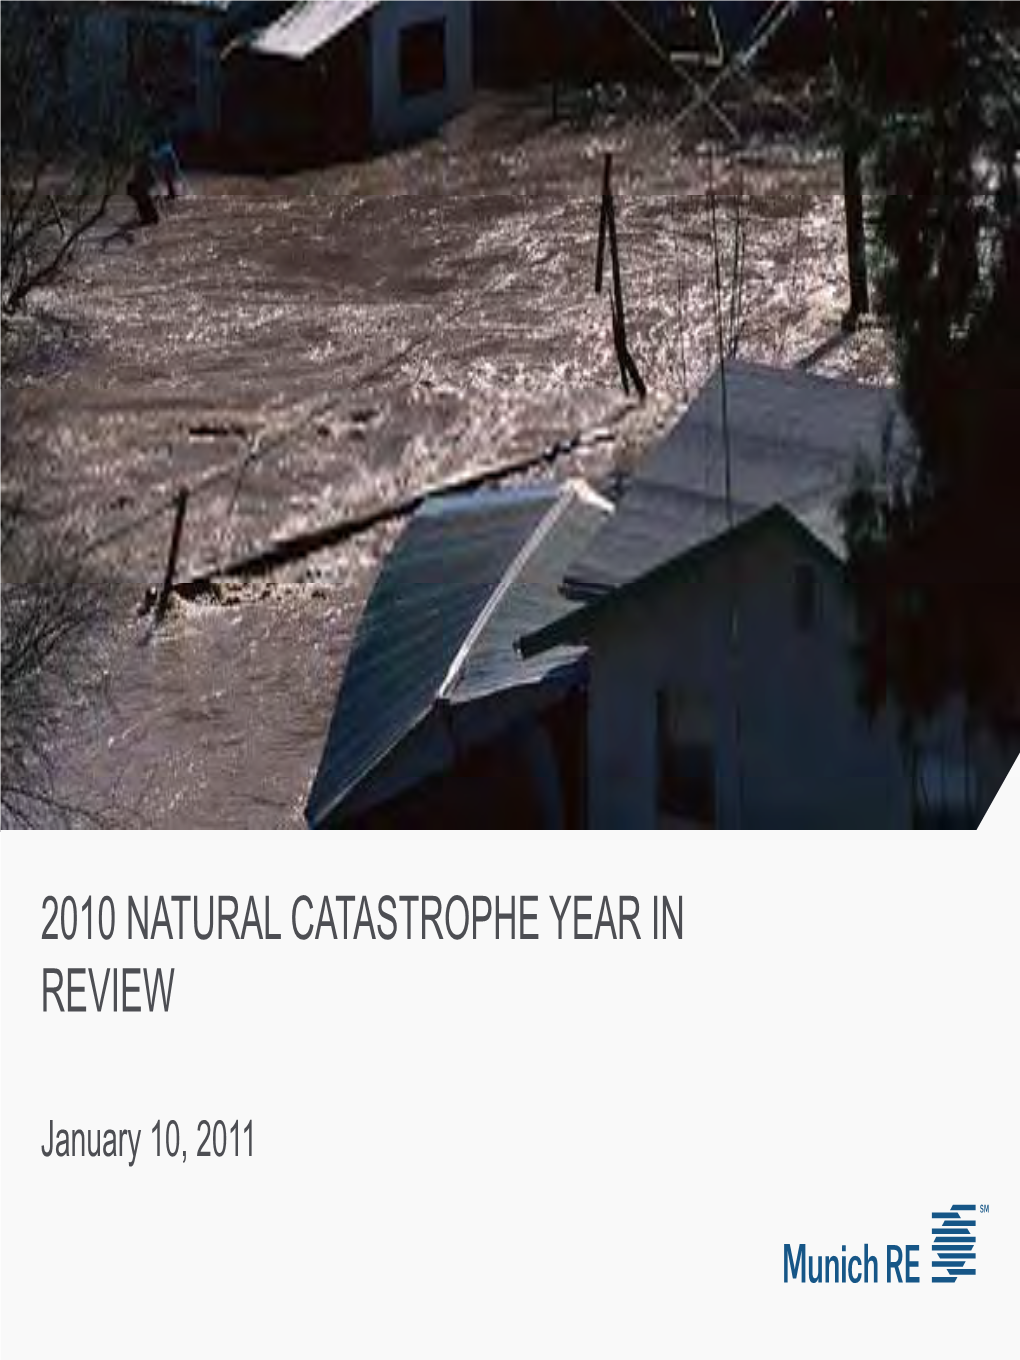 2010 Natural Catastrophe Year in Review